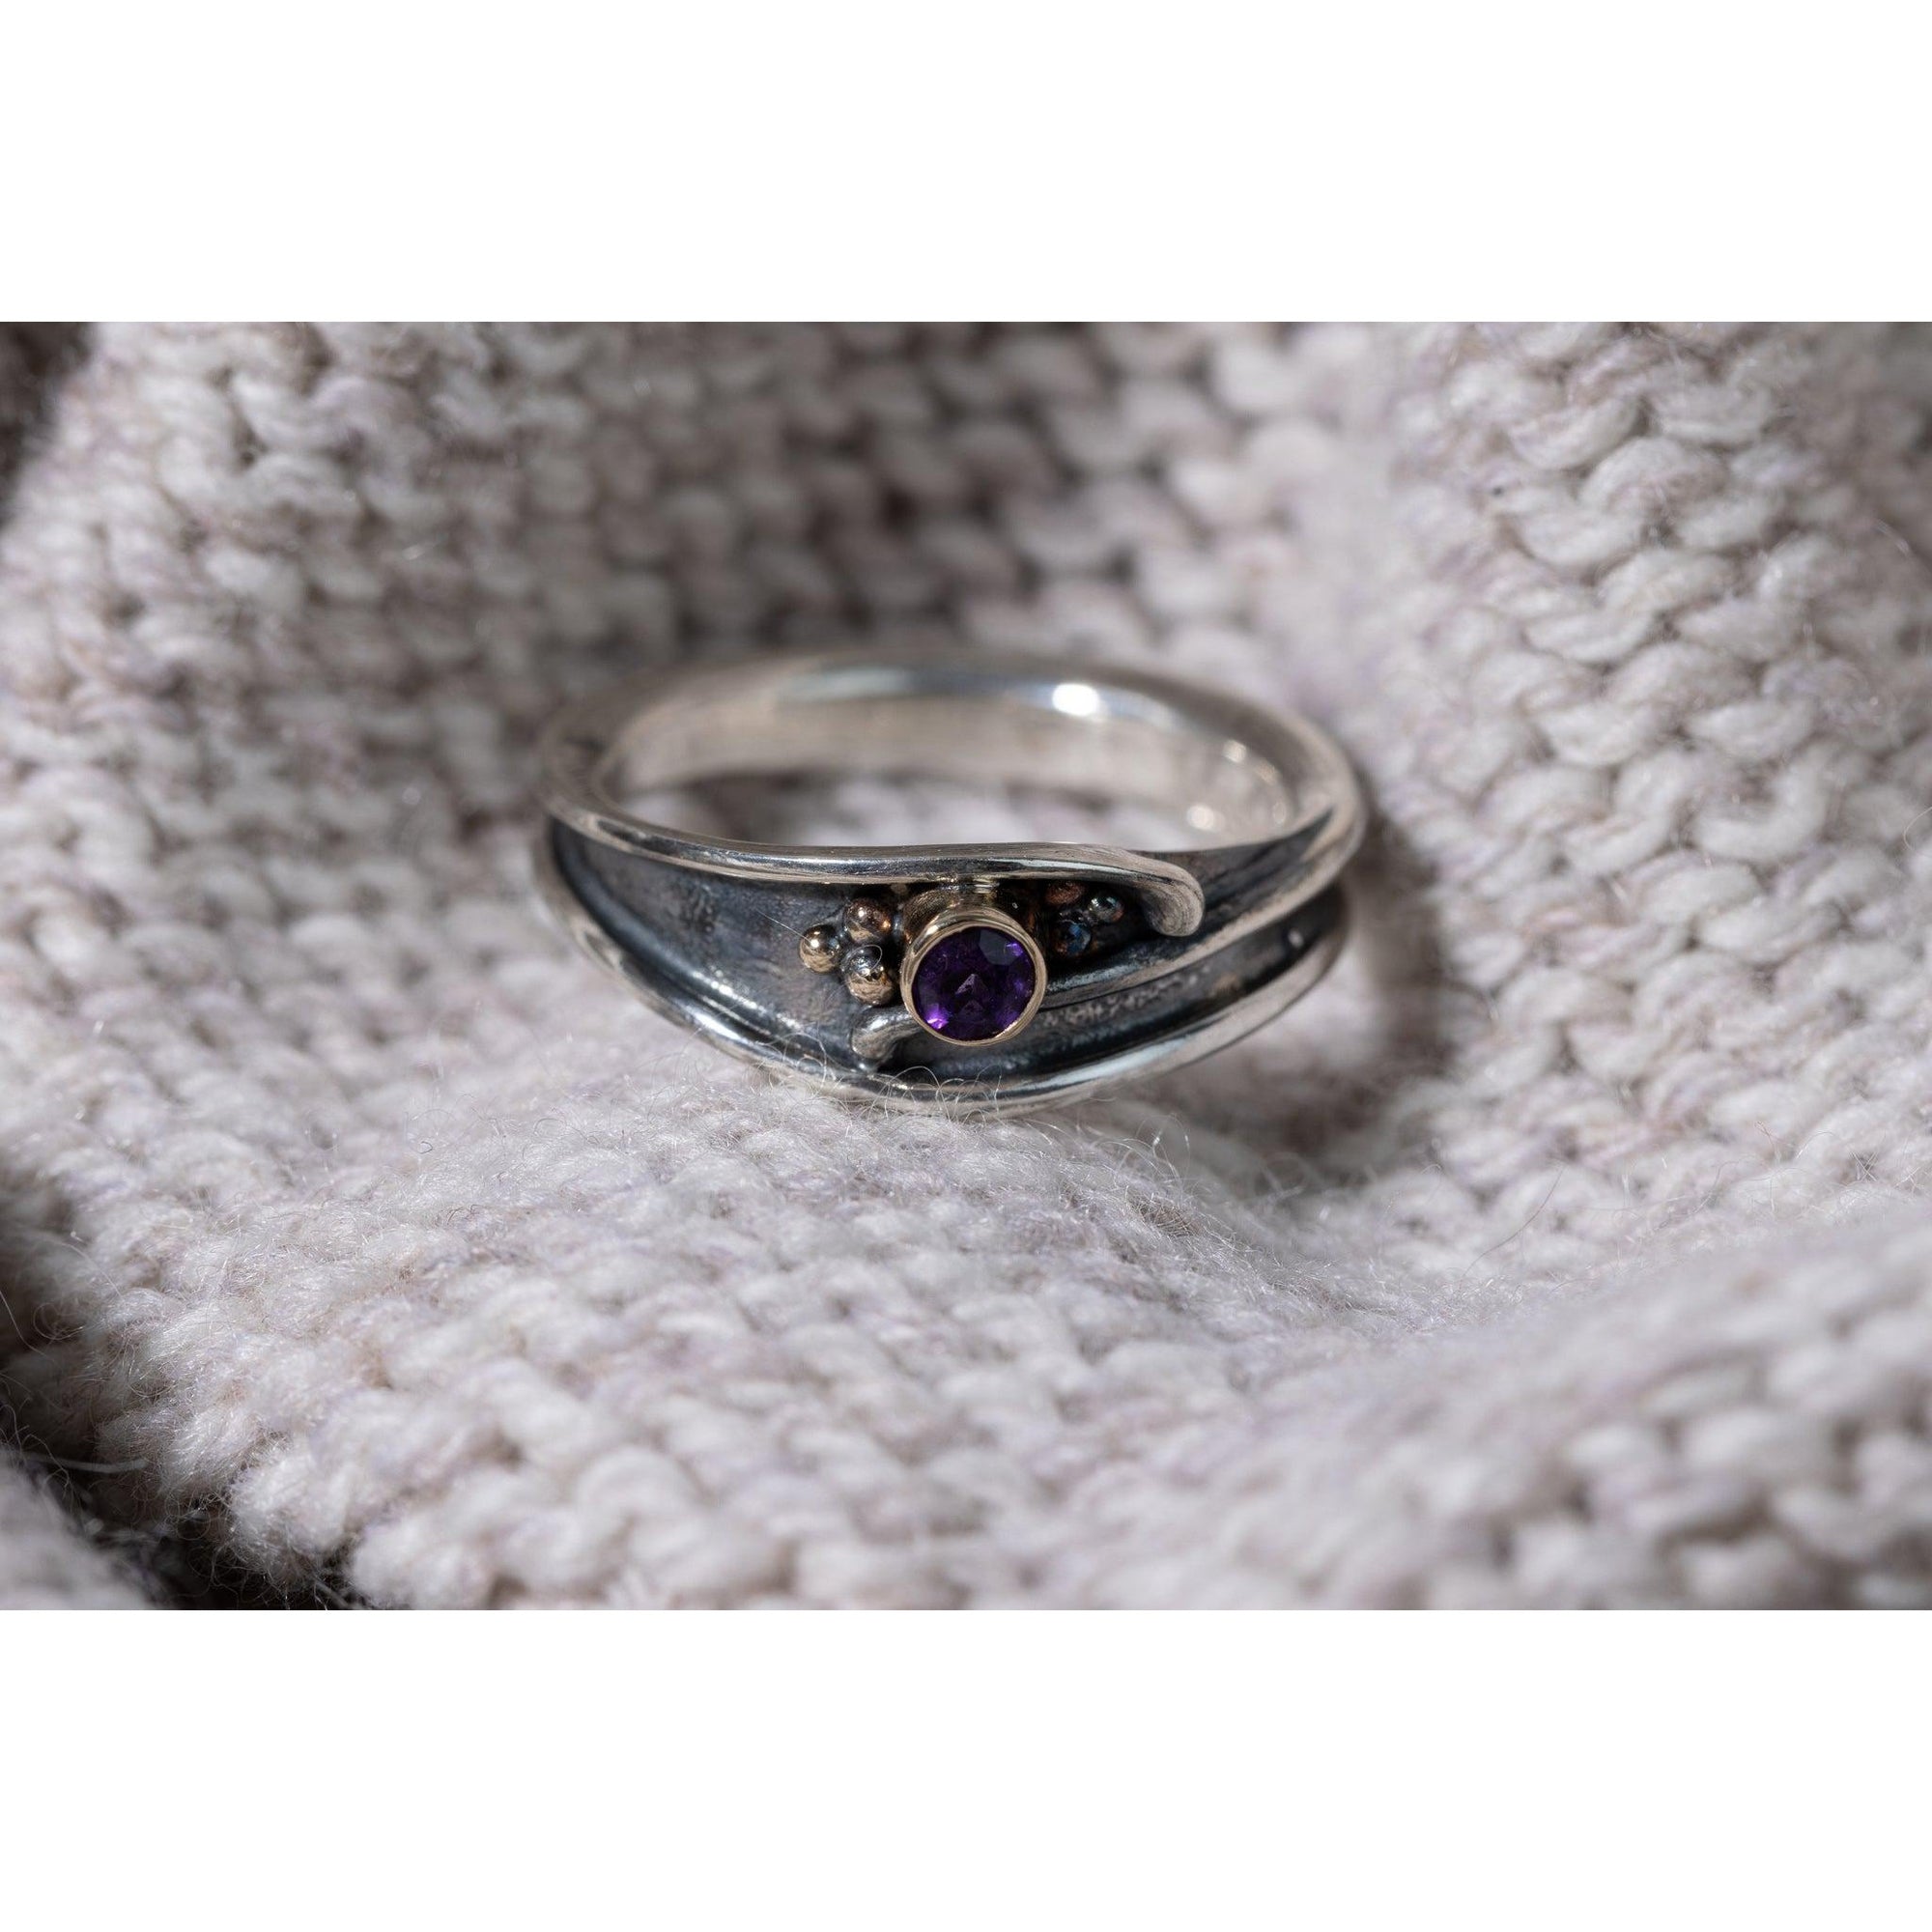 'LG67 - Silver Ring with 9ct Gold 3.5mm Amethyst Ring ' by Les Grimshaw, available at Padstow Gallery, Cornwall